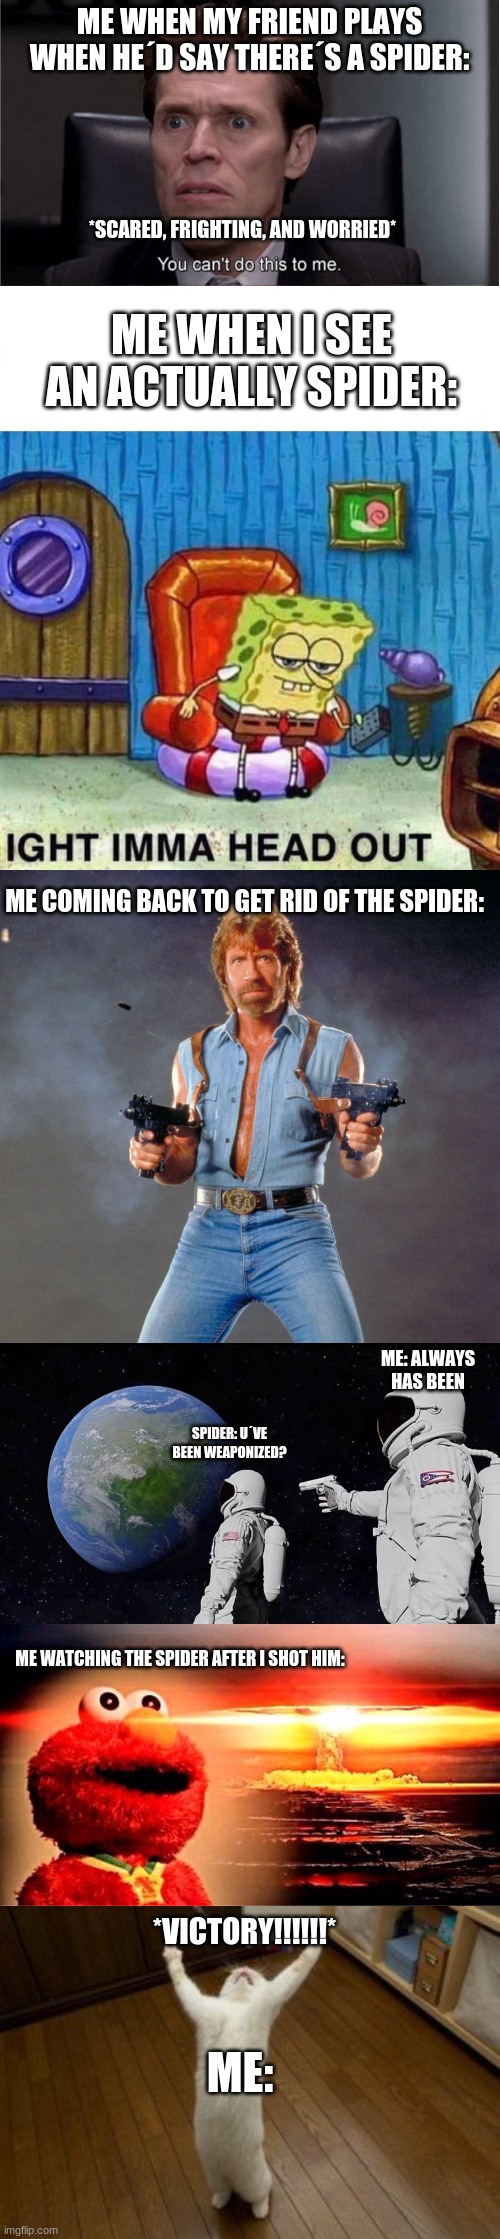 Me in a nutshell | ME WHEN MY FRIEND PLAYS WHEN HE´D SAY THERE´S A SPIDER: *SCARED, FRIGHTING, AND WORRIED* ME WHEN I SEE AN ACTUALLY SPIDER: ME COMING BACK TO | image tagged in you can't do this to me,memes,spongebob ight imma head out,chuck norris guns,always has been,elmo nuclear explosion | made w/ Imgflip meme maker